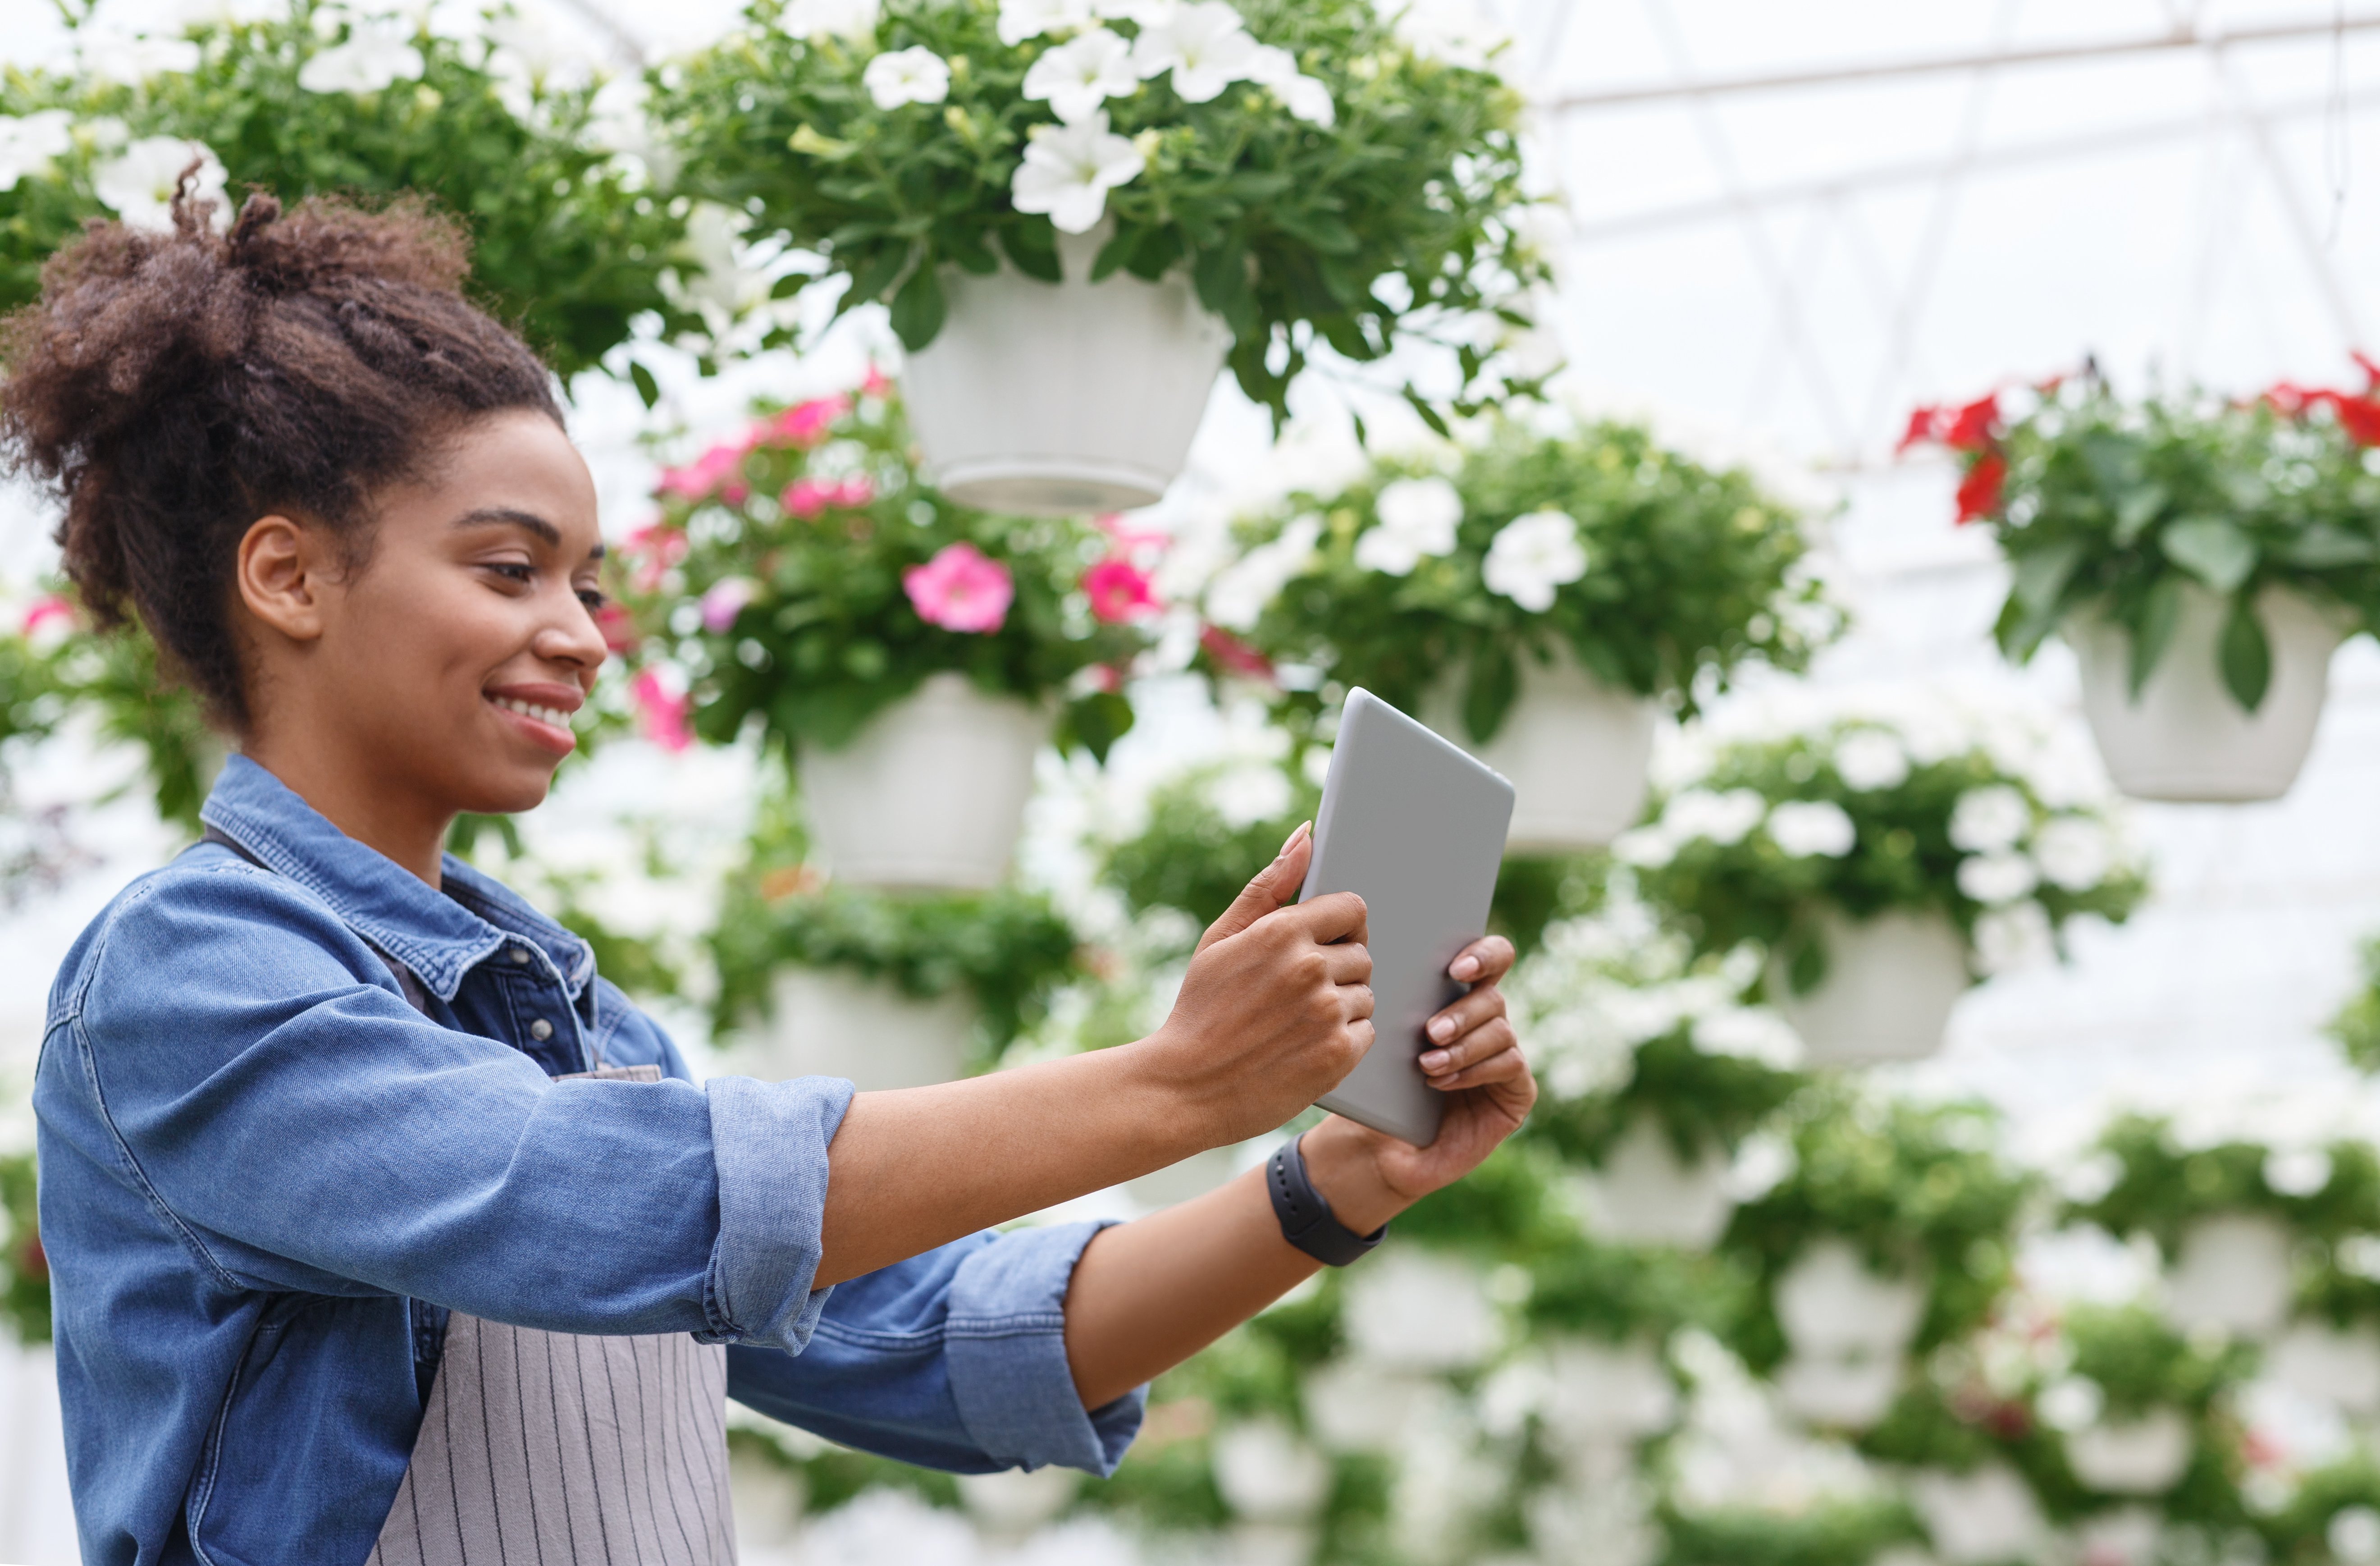 Working with digital technology in greenhouses with flowers. African american and farm worker girl